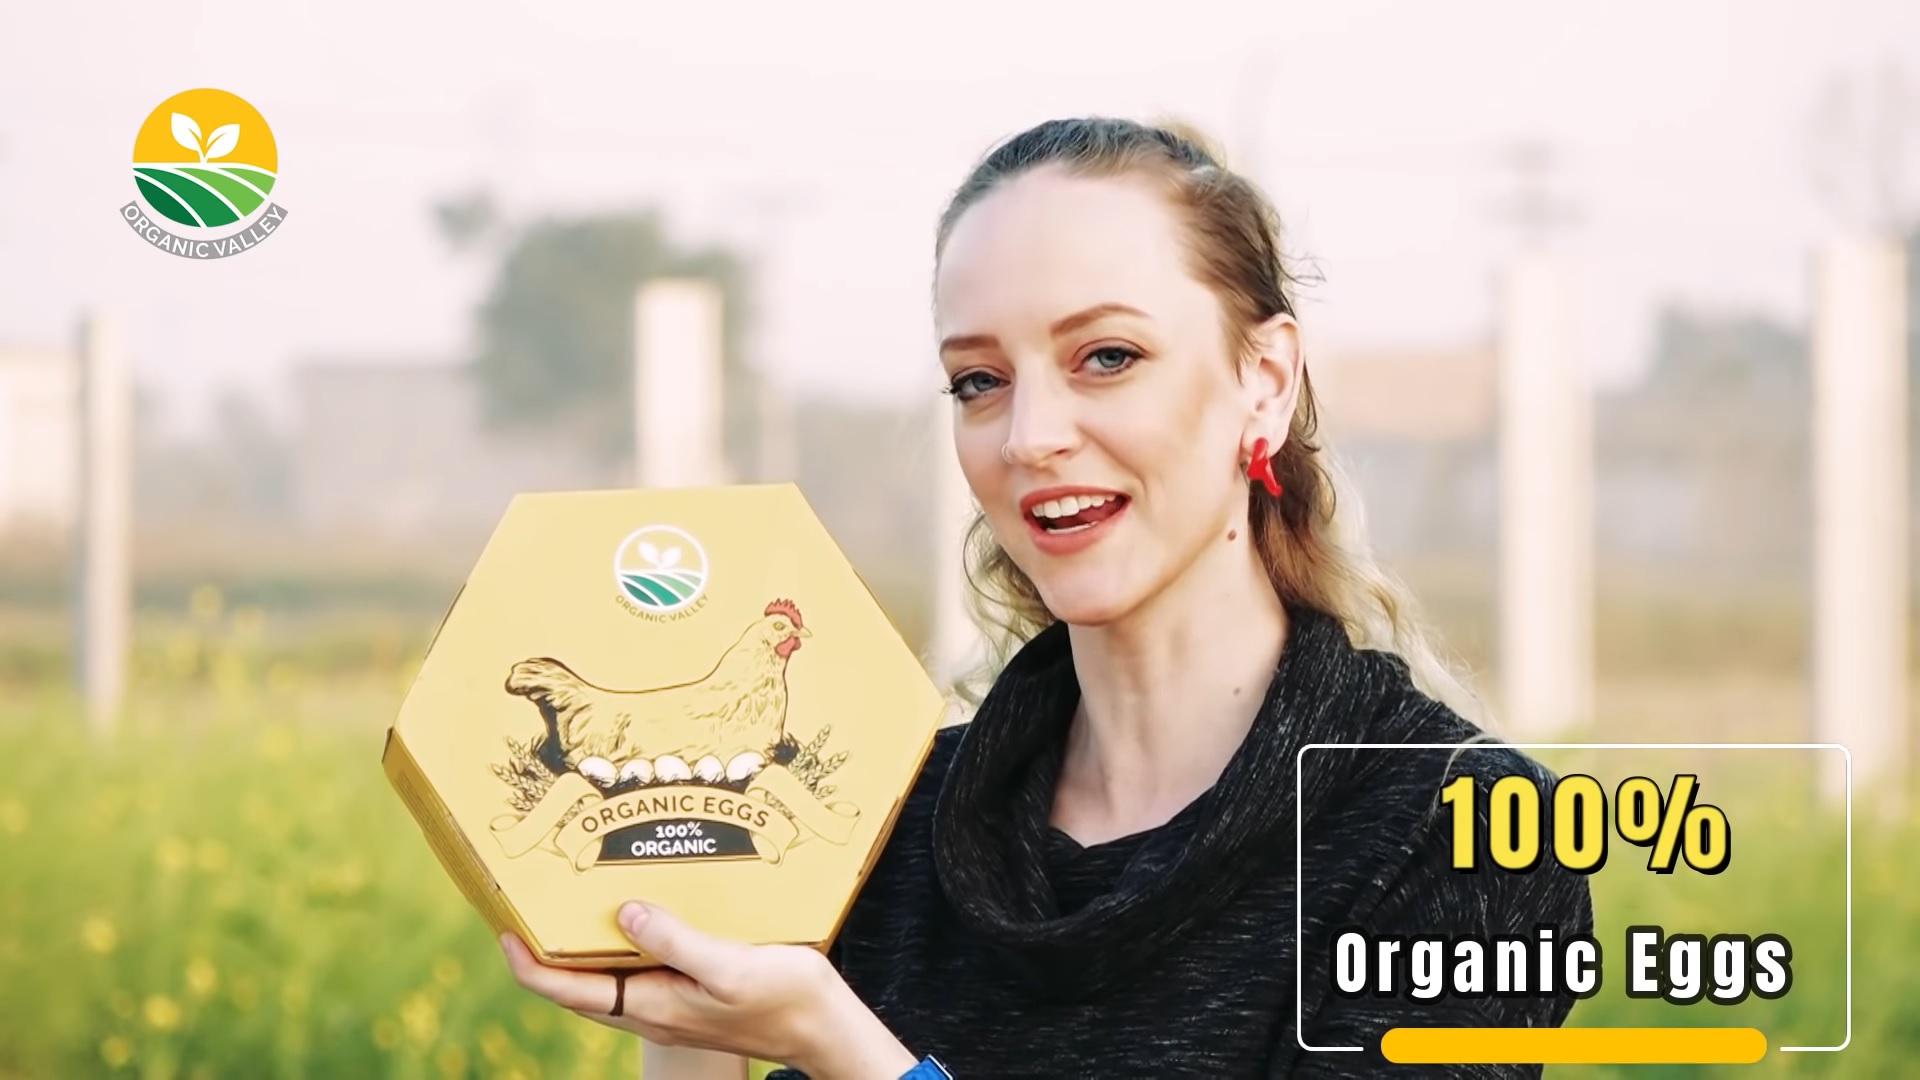 Organic Eggs Commercial 